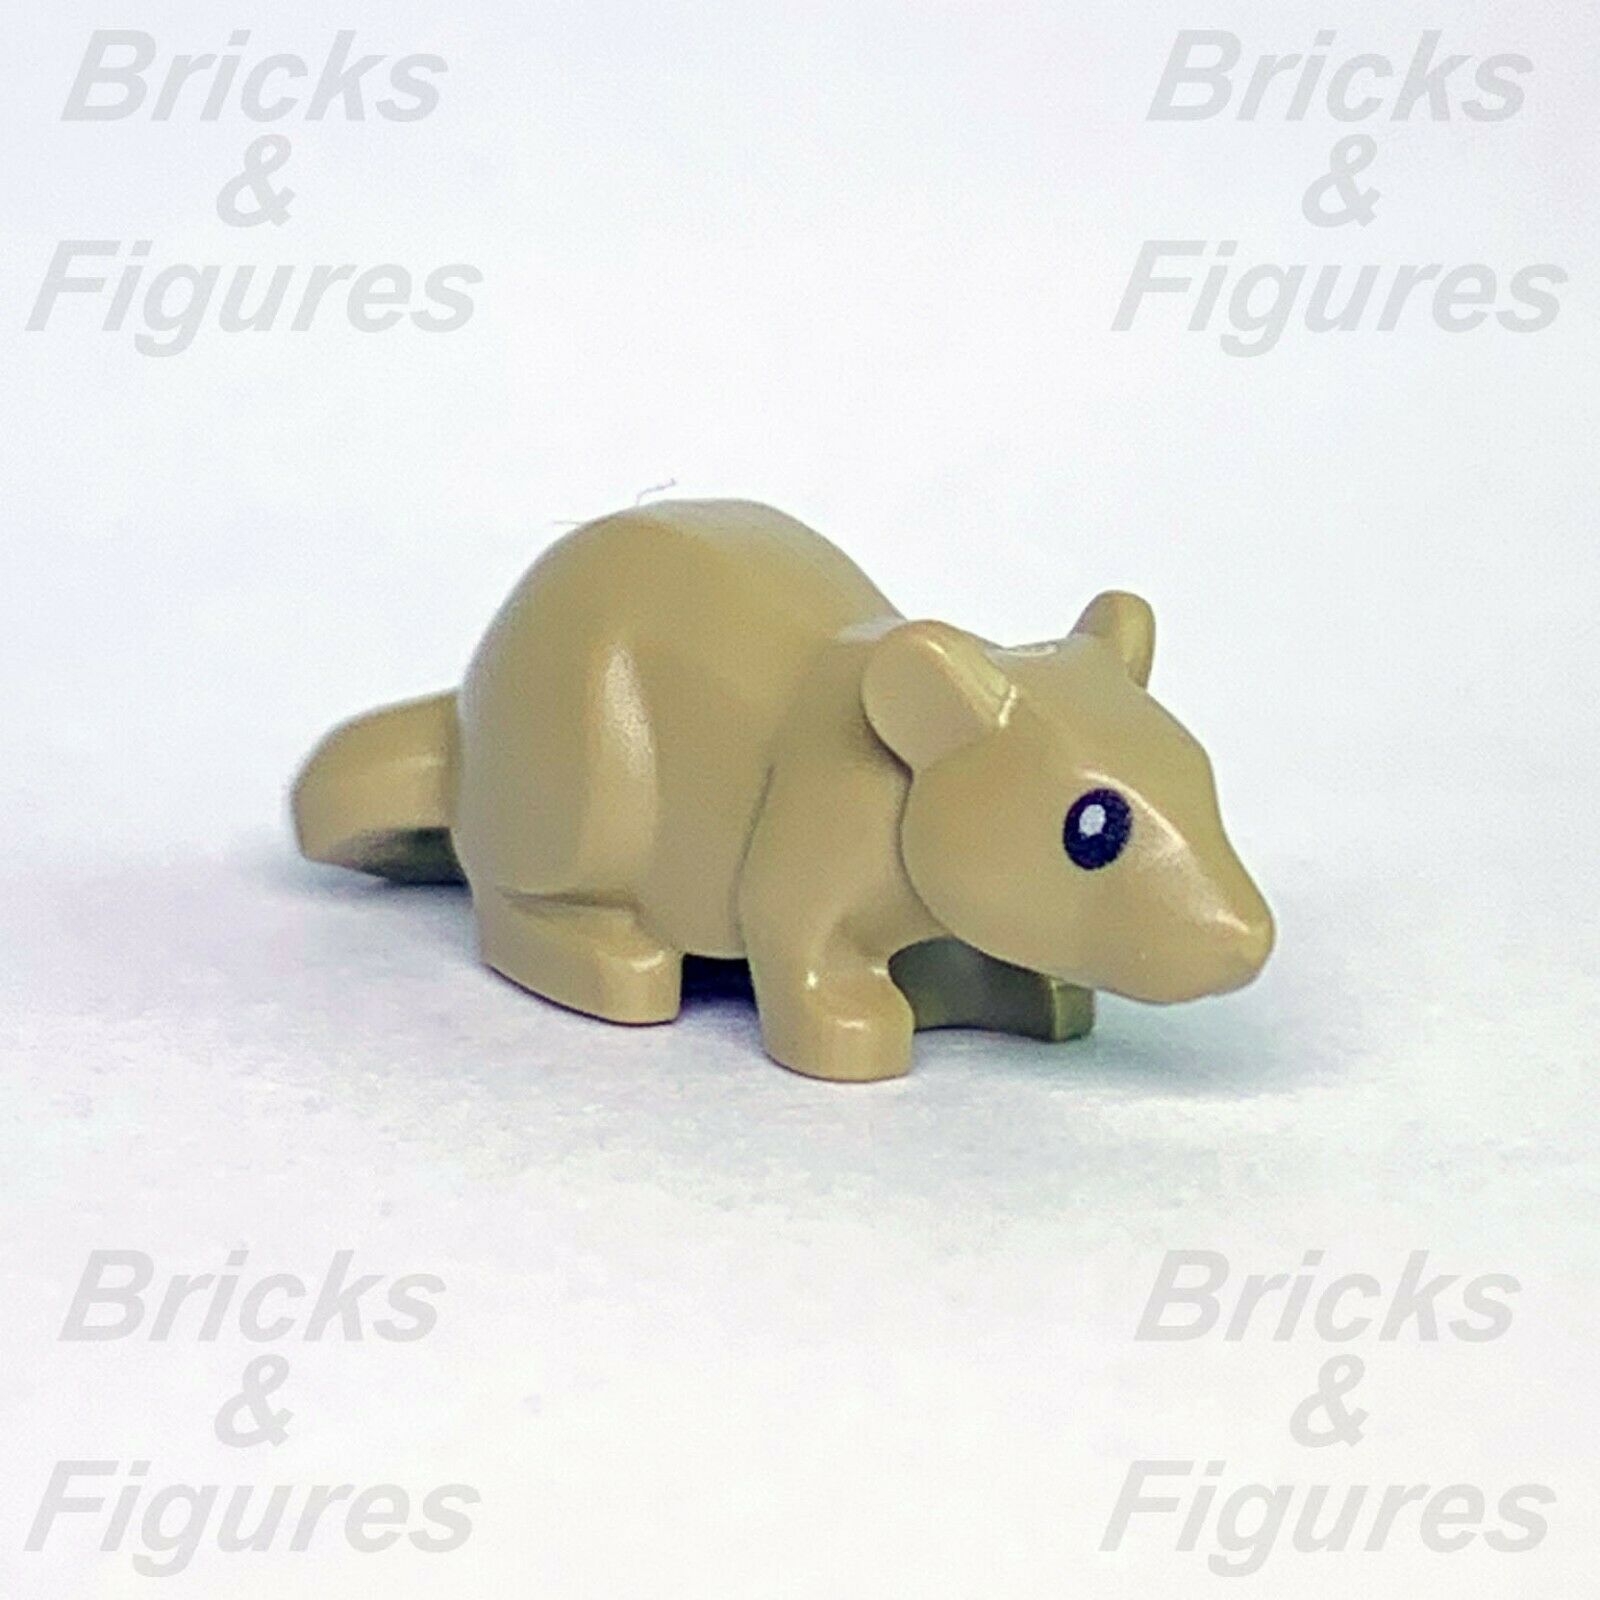 Town & City LEGO Rat / Mouse Animal Part from set 60192 75955 75954 76129 70840 - Bricks & Figures